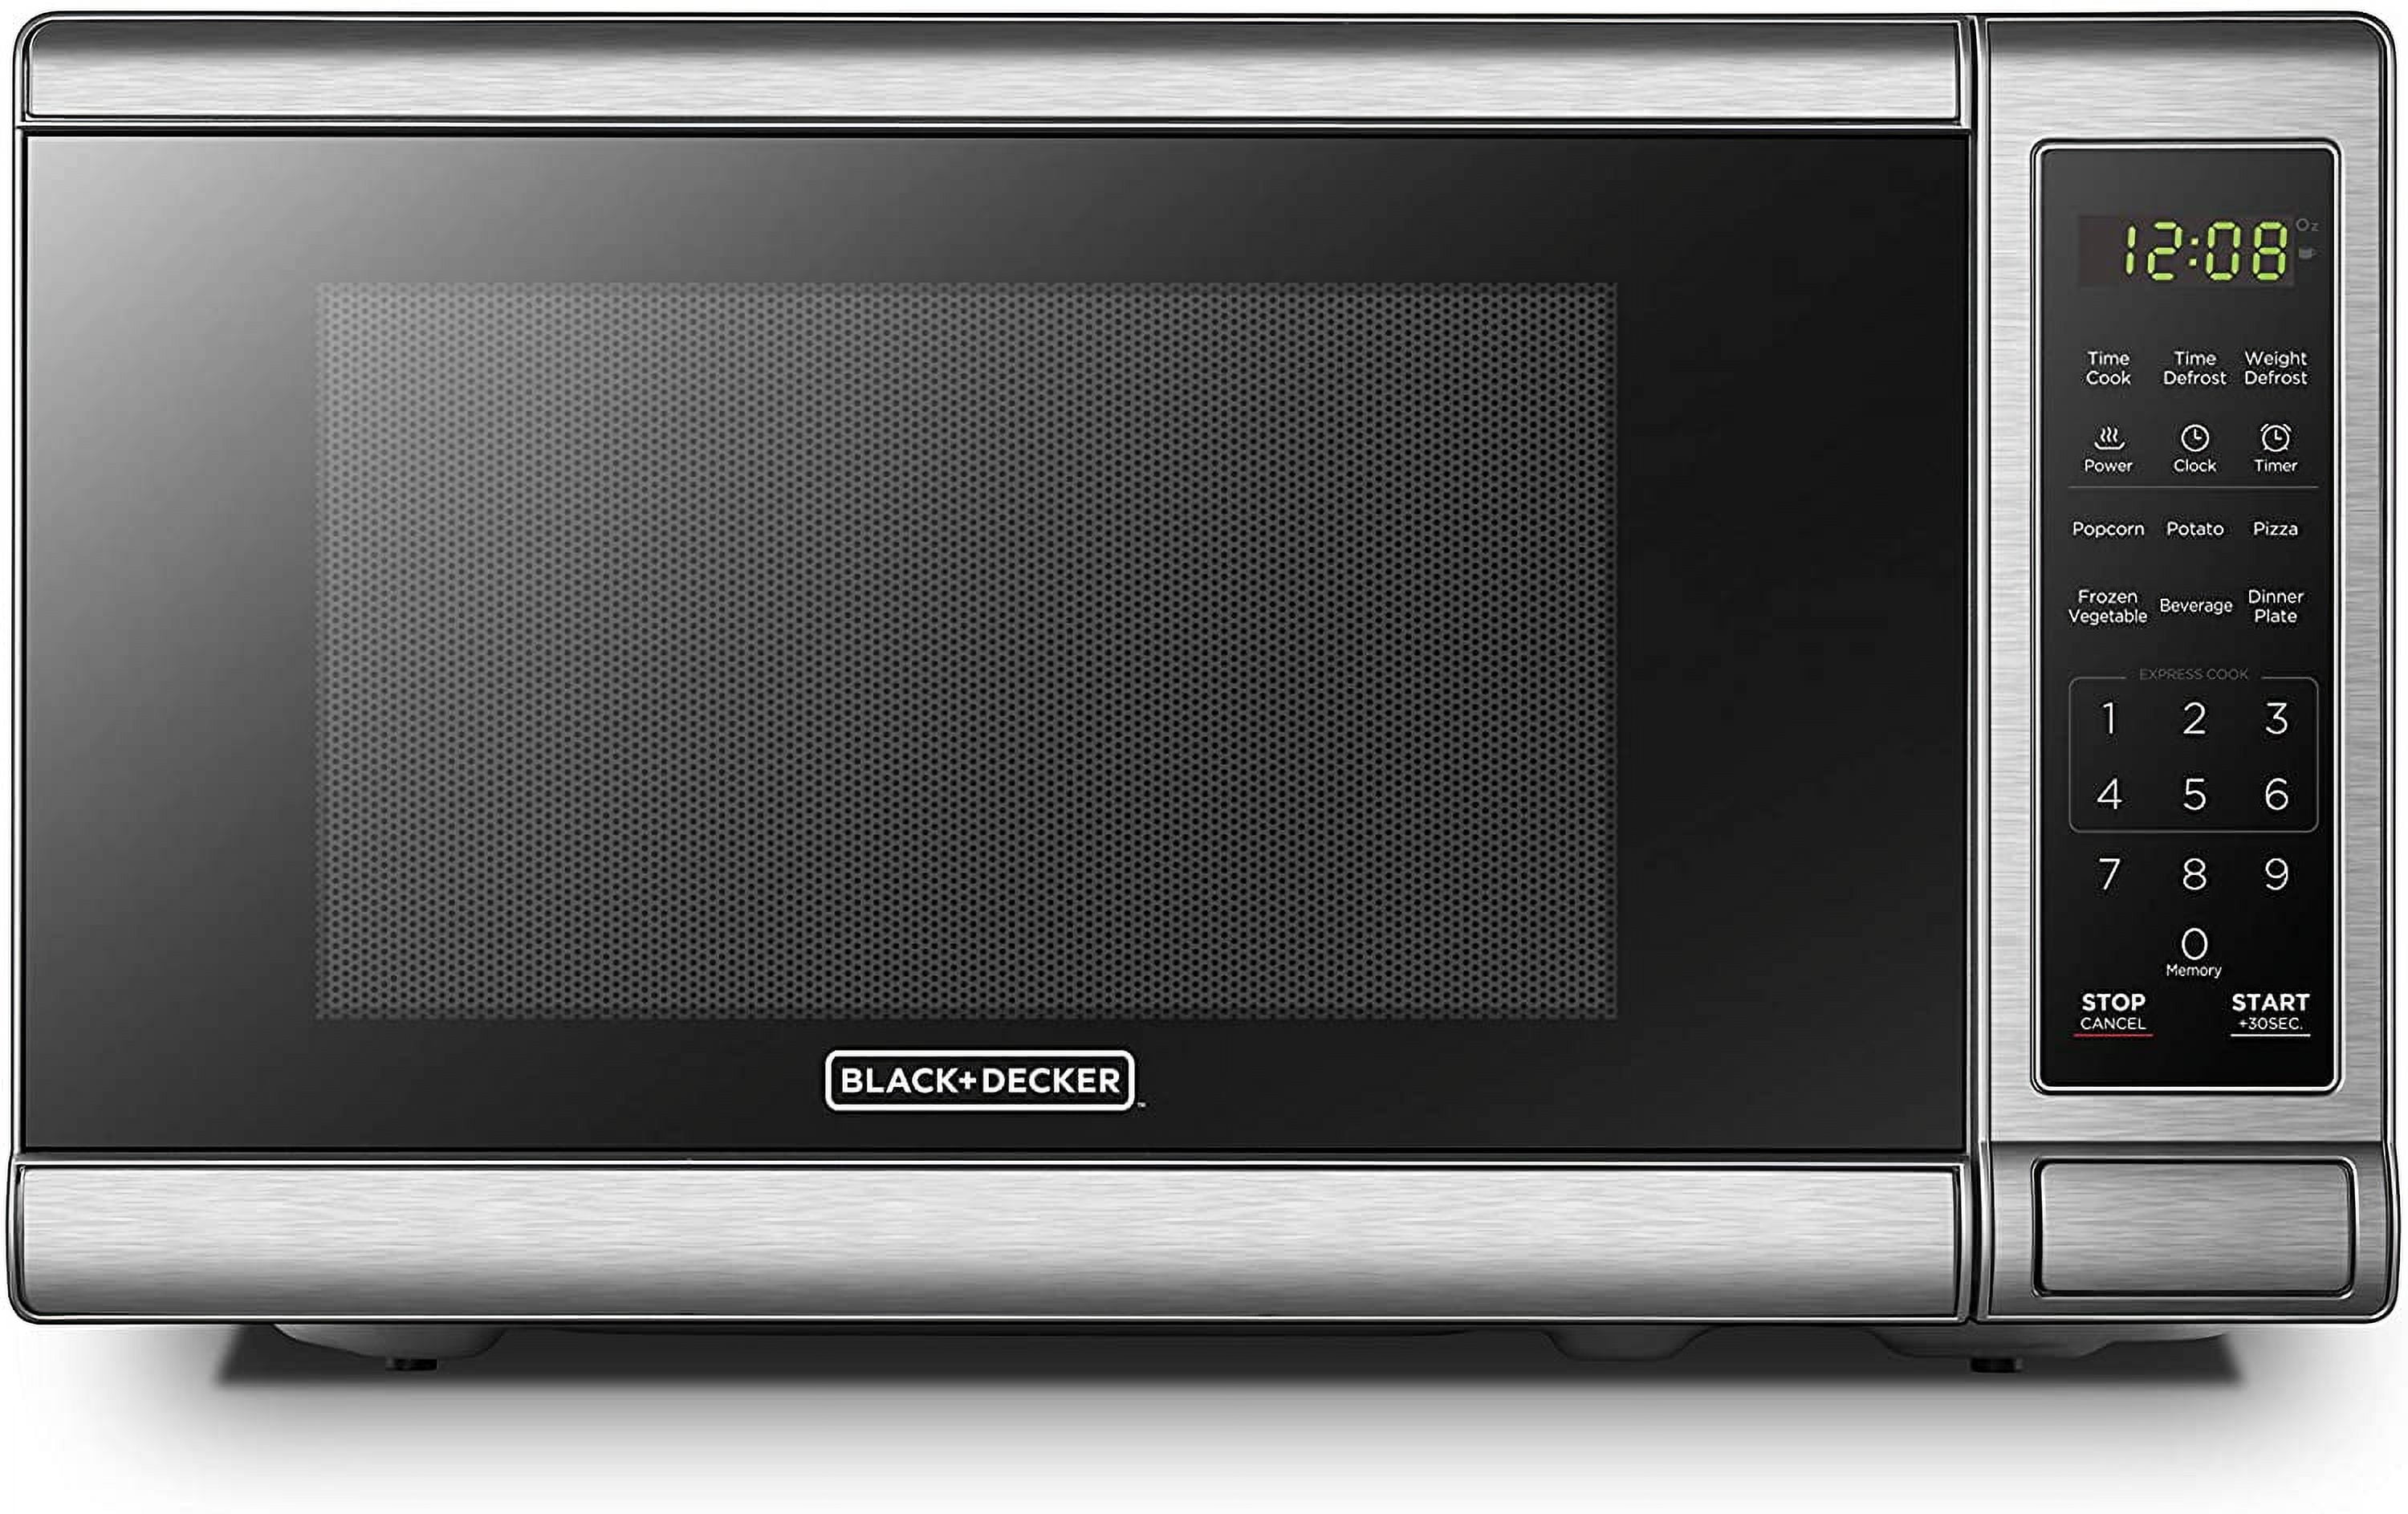 Black+decker Em720cb7 Digital Microwave Oven with Turntable Push-Button Door, Stainless Steel, 0.7 CU.FT